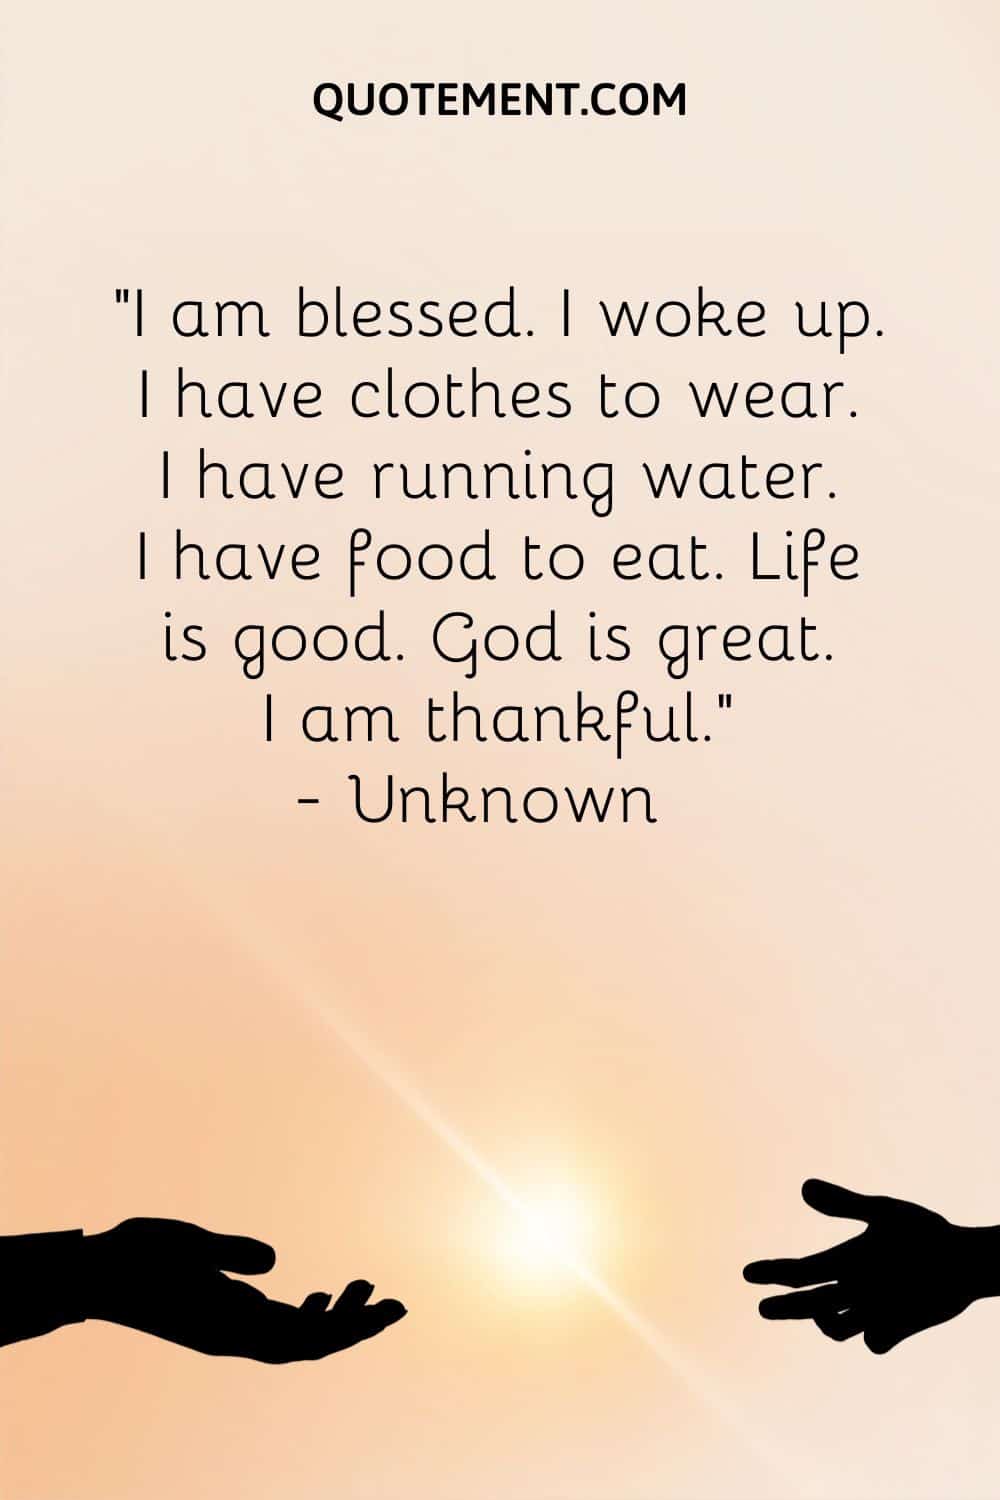 “I am blessed. I woke up. I have clothes to wear. I have running water. I have food to eat. Life is good. God is great. I am thankful.” — Unknown